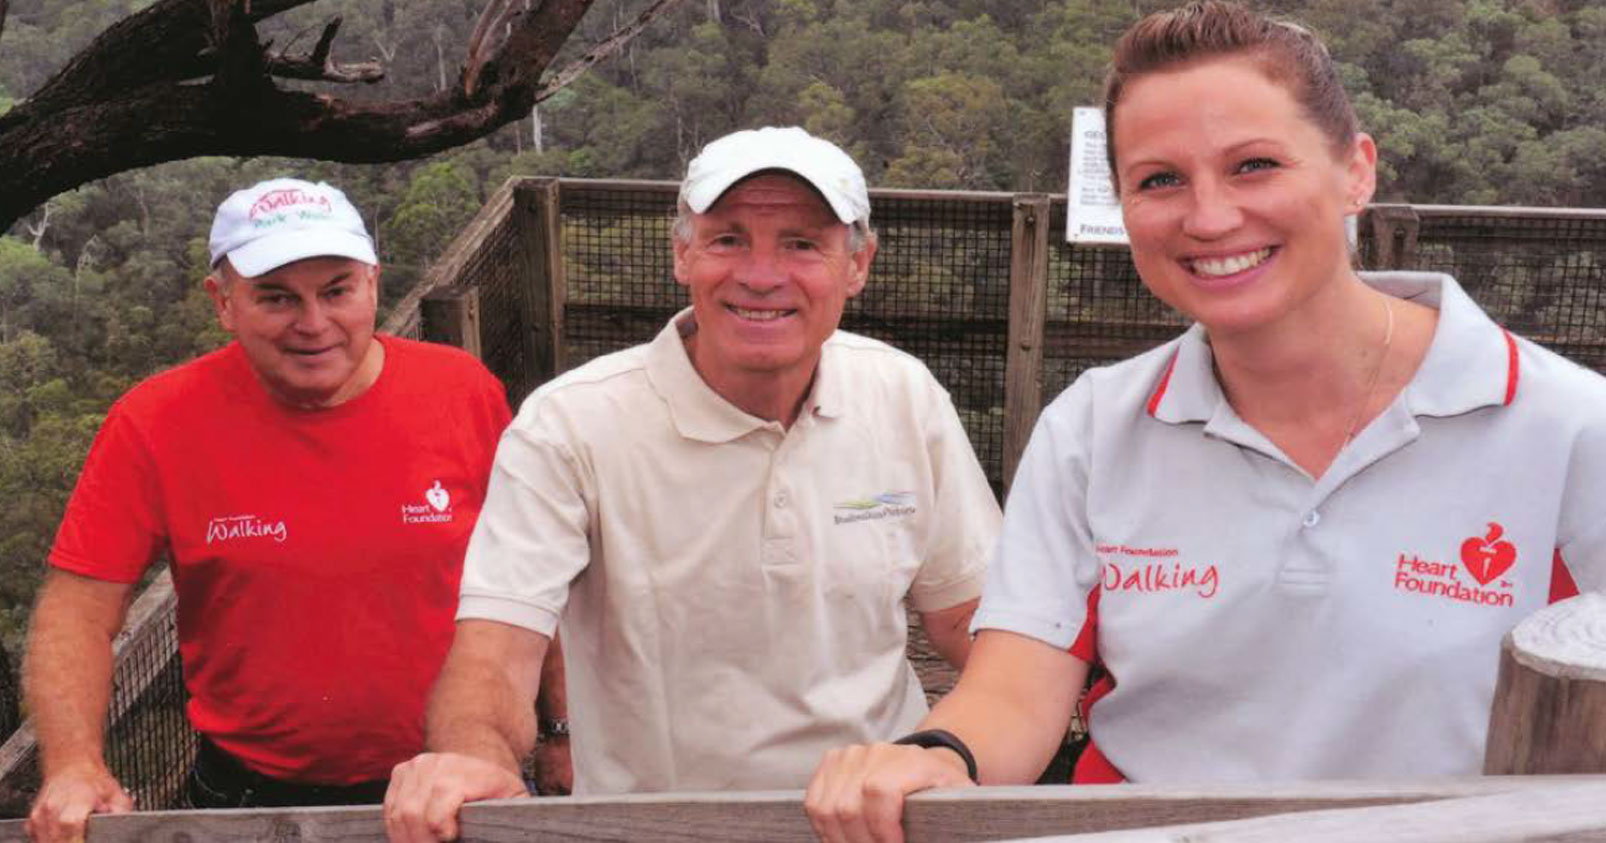 Jim Stranger (left) with Joe van Beek, Friends of Tyers Park member, and Stacey Podmore, Health Promotion Officer Latrobe Community Health Services, on a reconnaissance for a Heart Foundation Park Walk at Petersons Lookout within the Tyers Park.